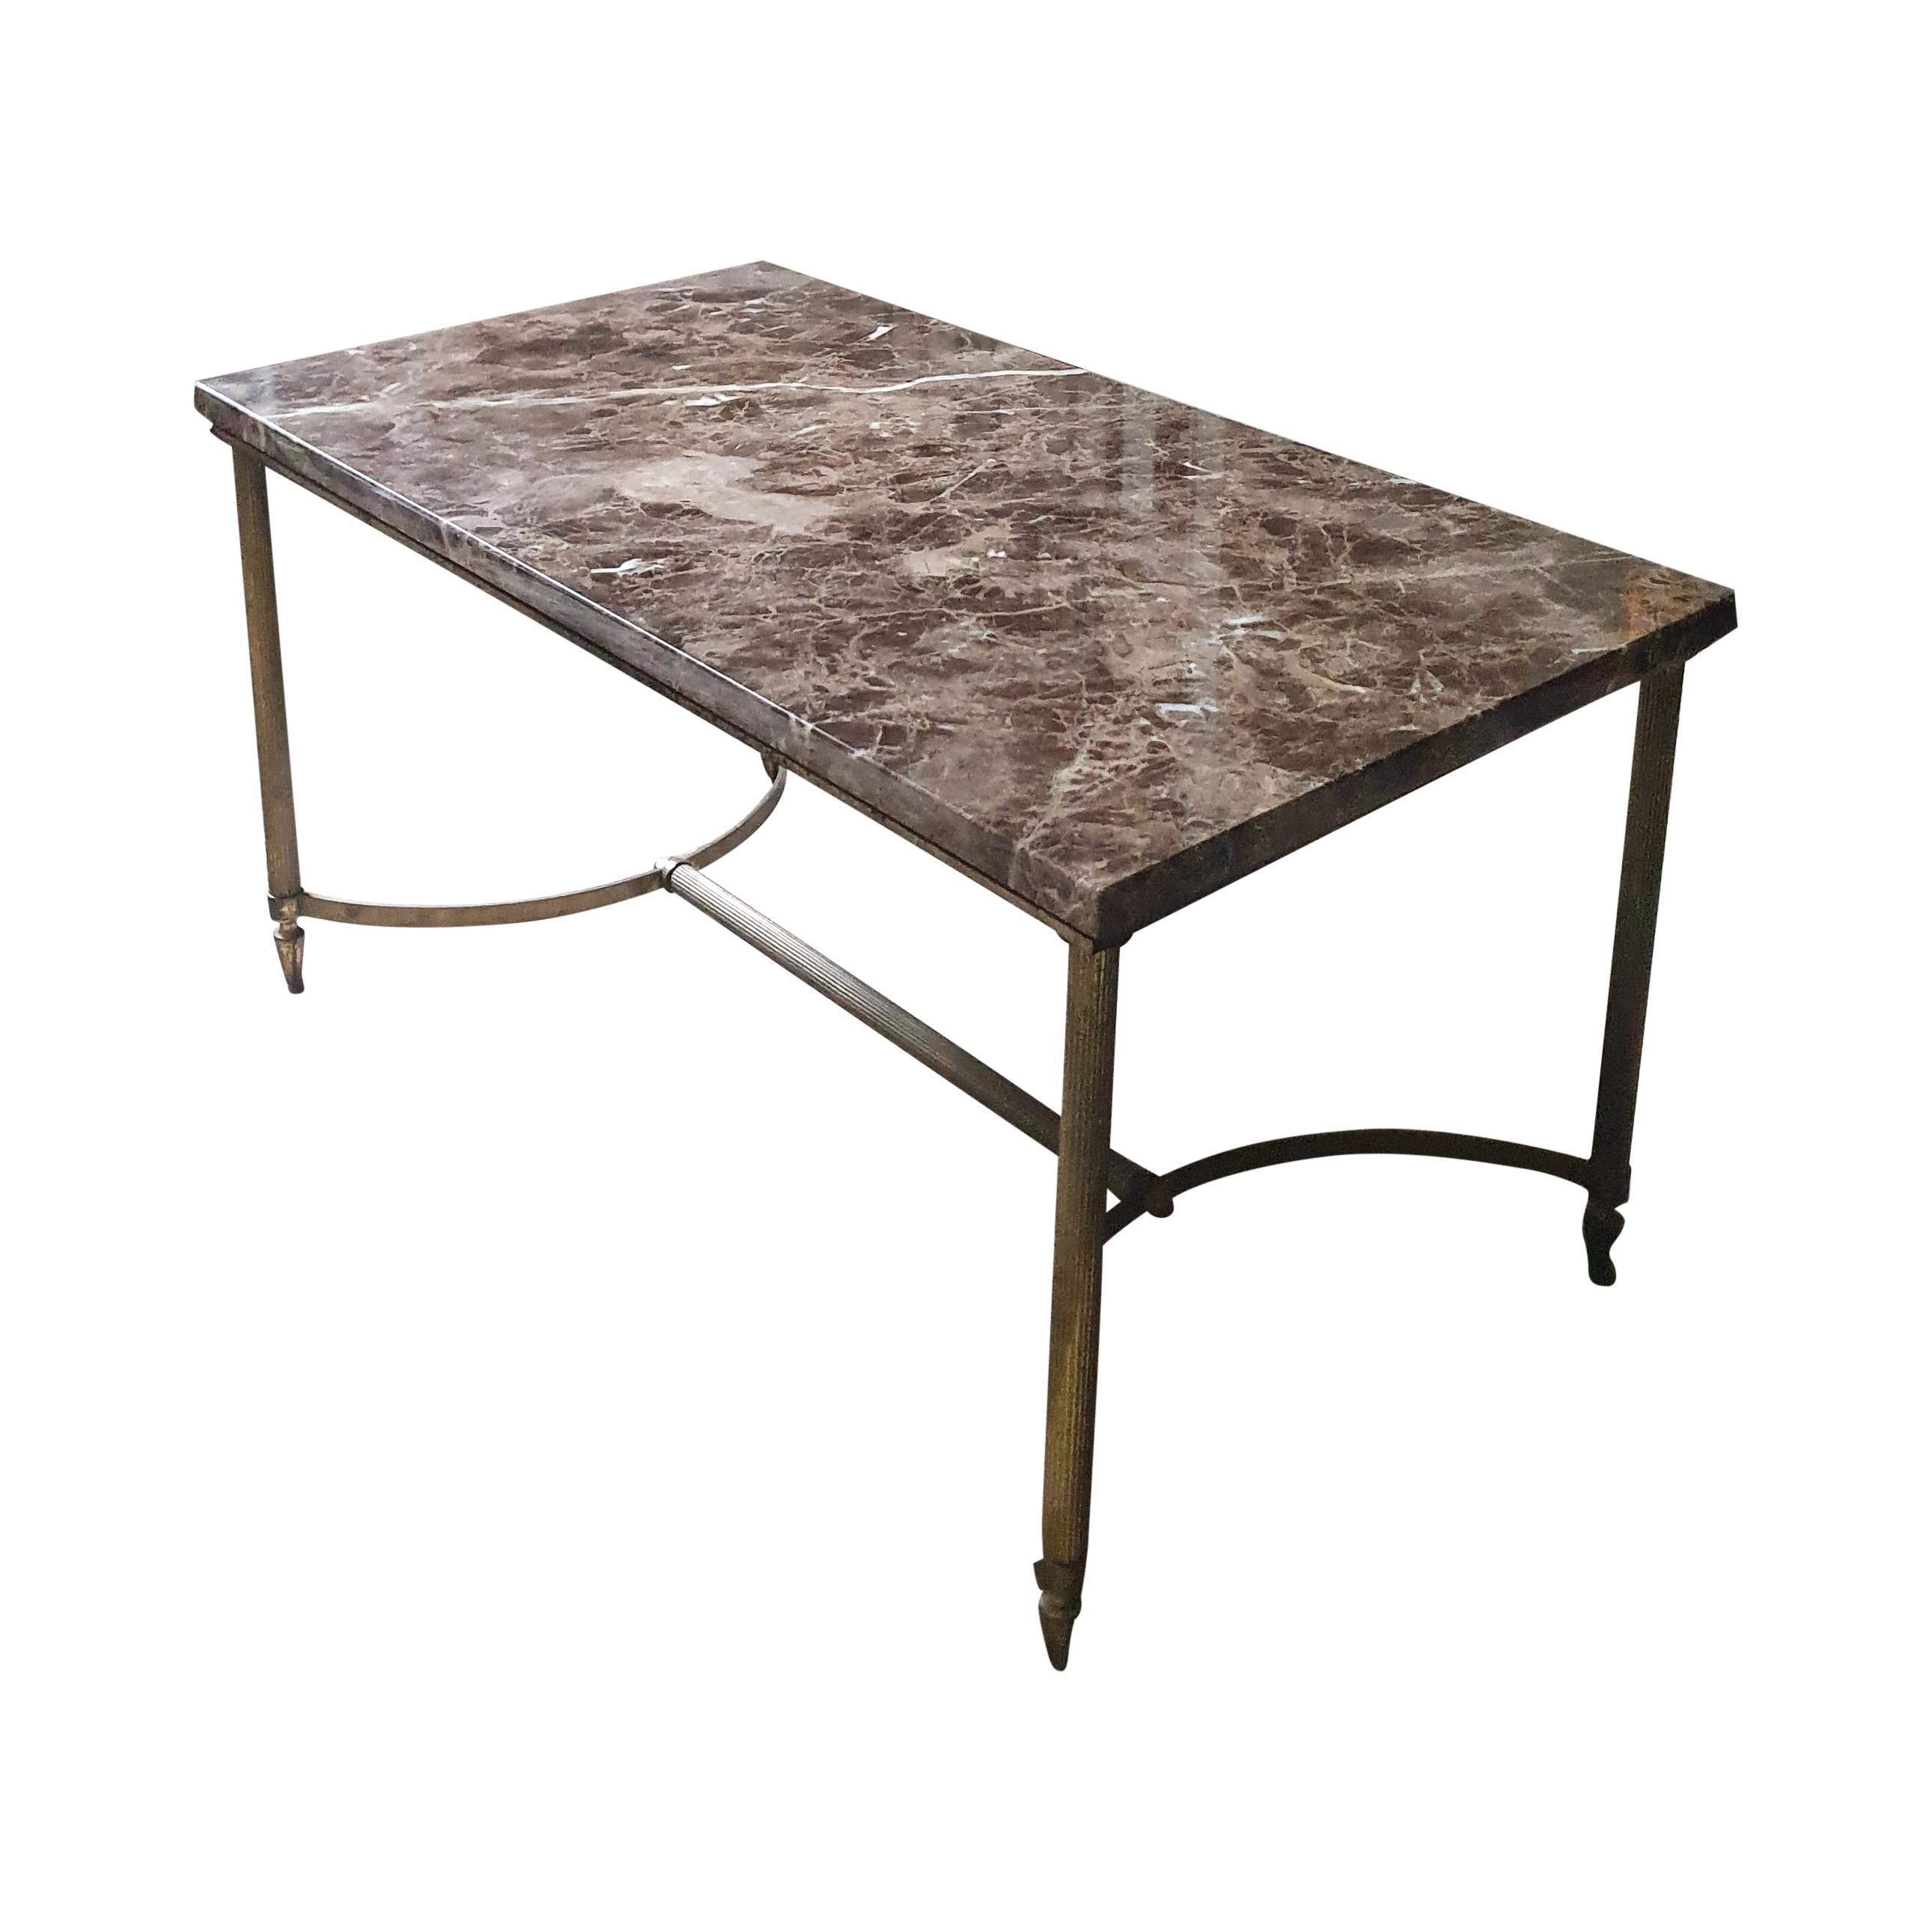 A beautiful hand crafted brass, bronze and marble coffee table circa 1960s. This lovely compact table has elegant cast Bronze feet which support thick fluted brass legs, the legs are attached to each other with semi circular Bronze bands connected